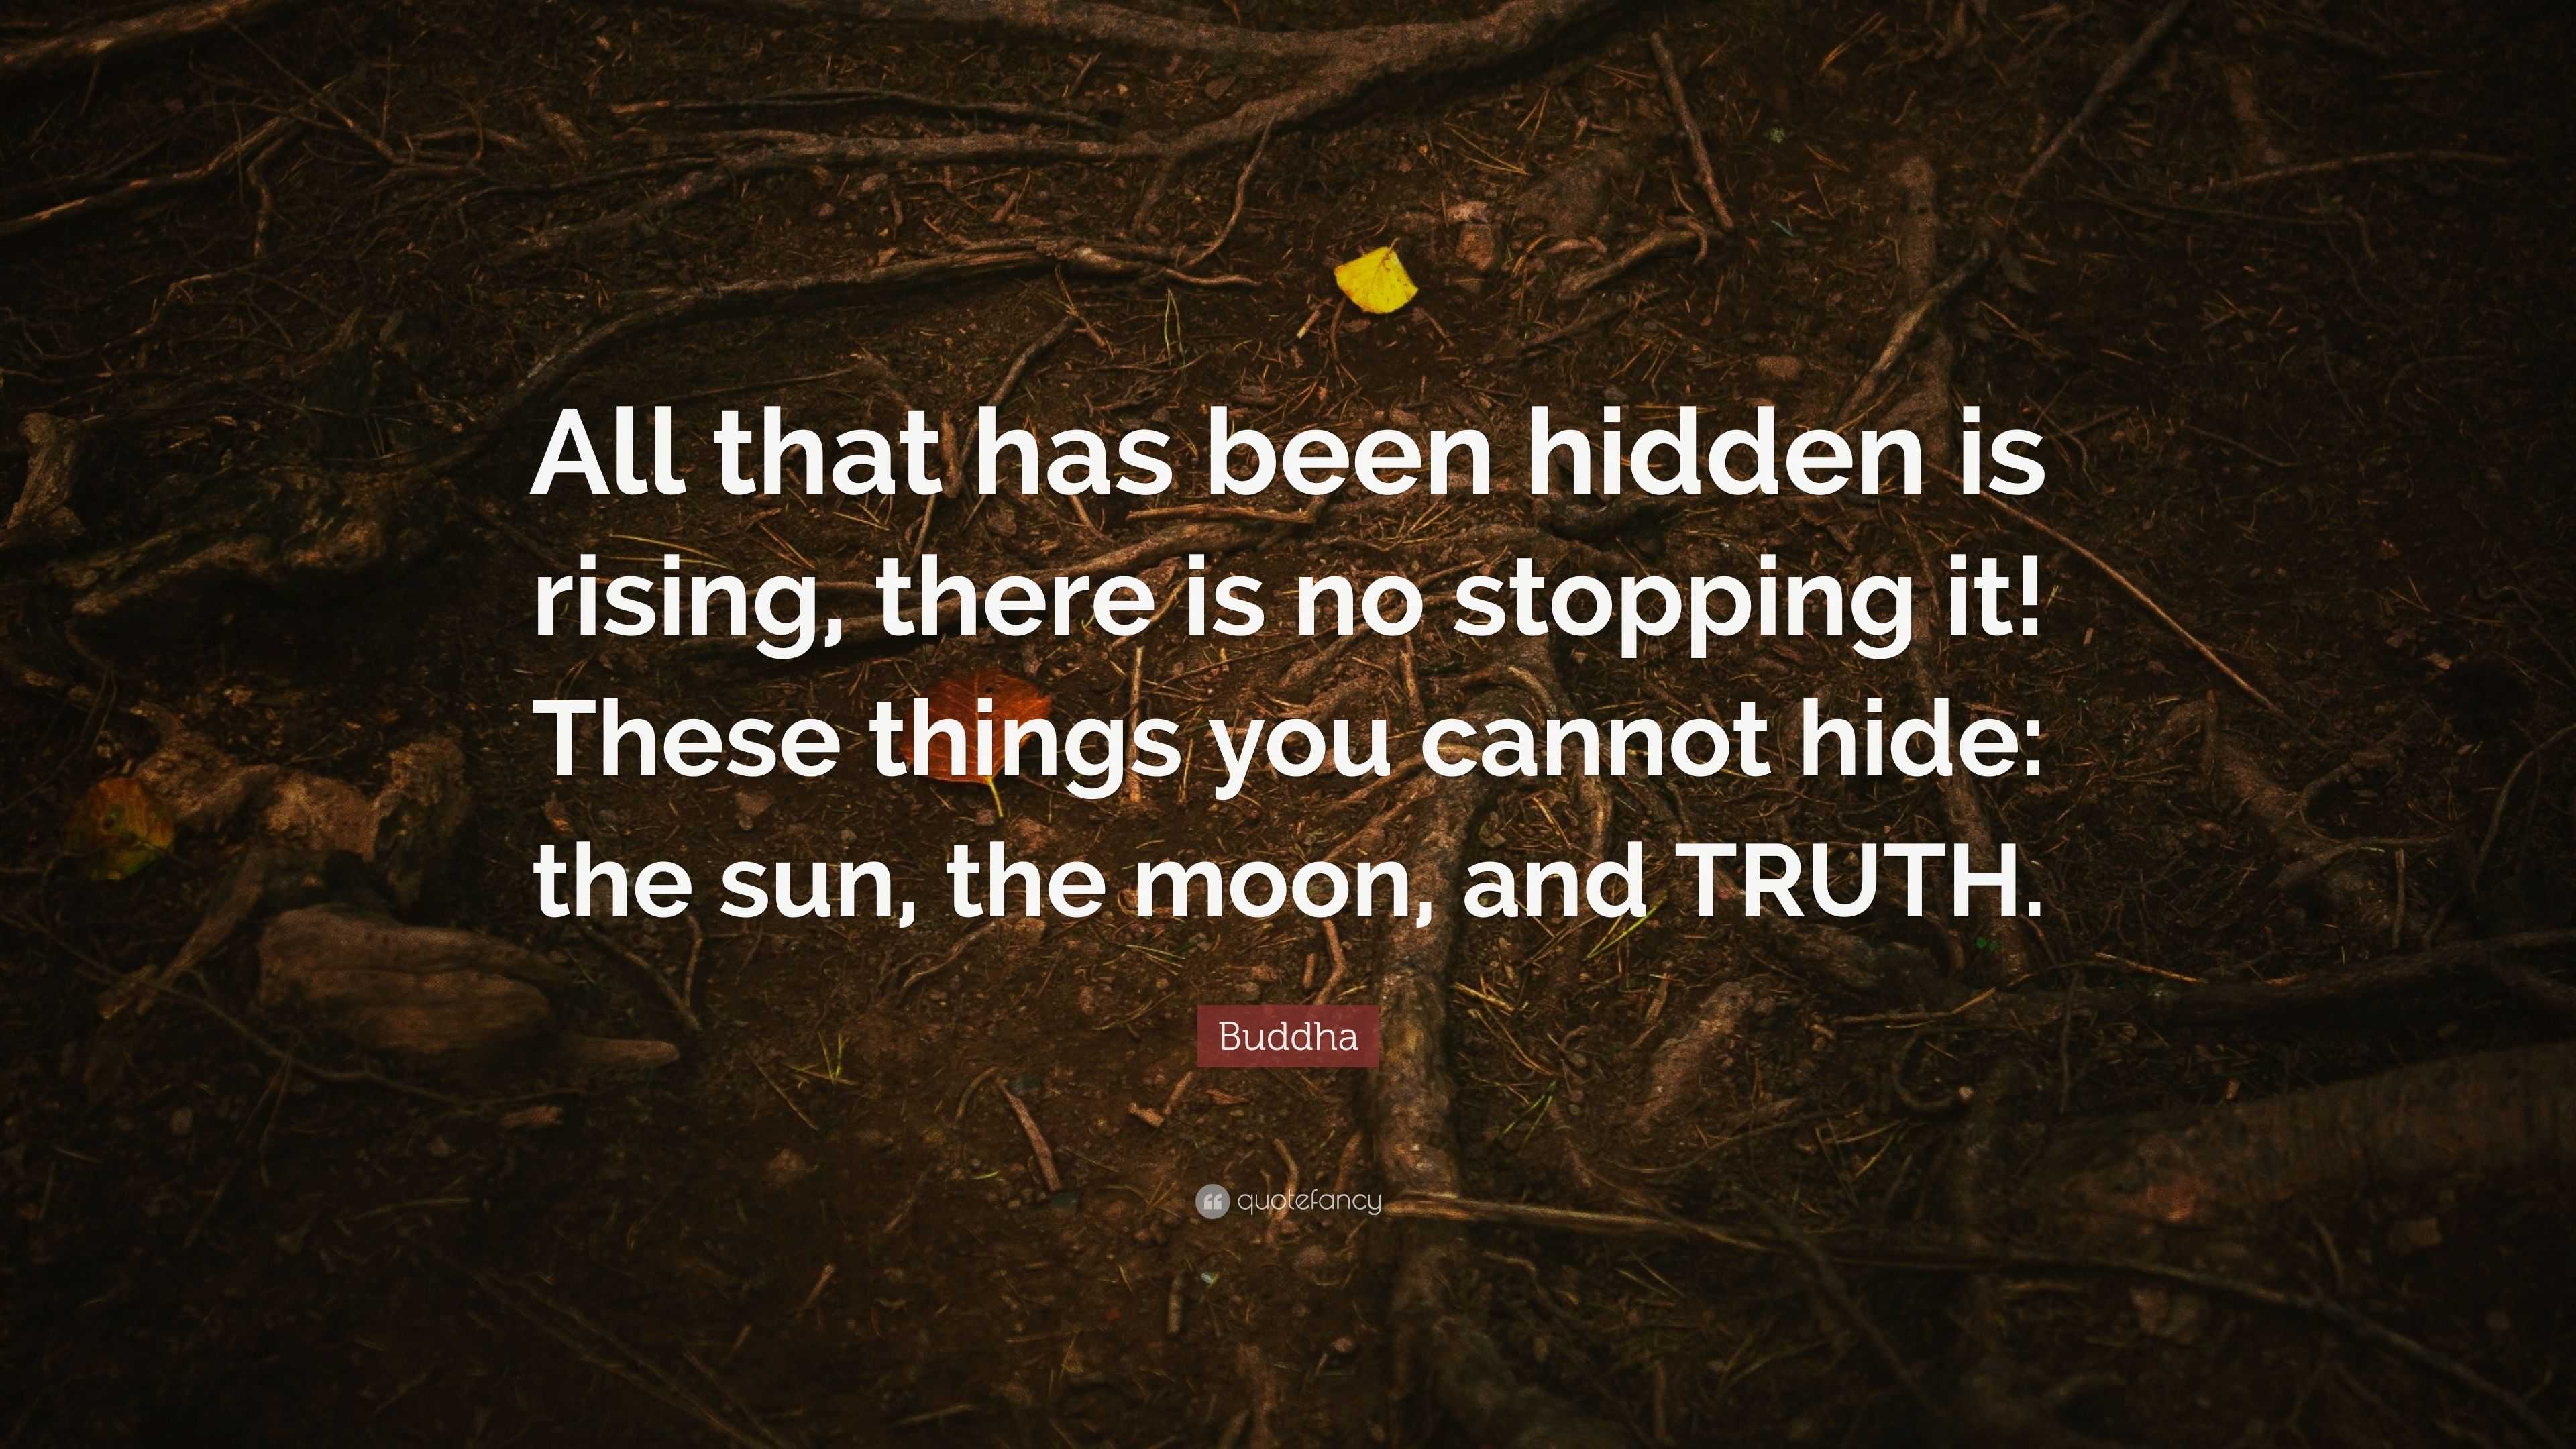 Buddha Quote: “All that has been hidden is rising, there is no stopping it!  These things